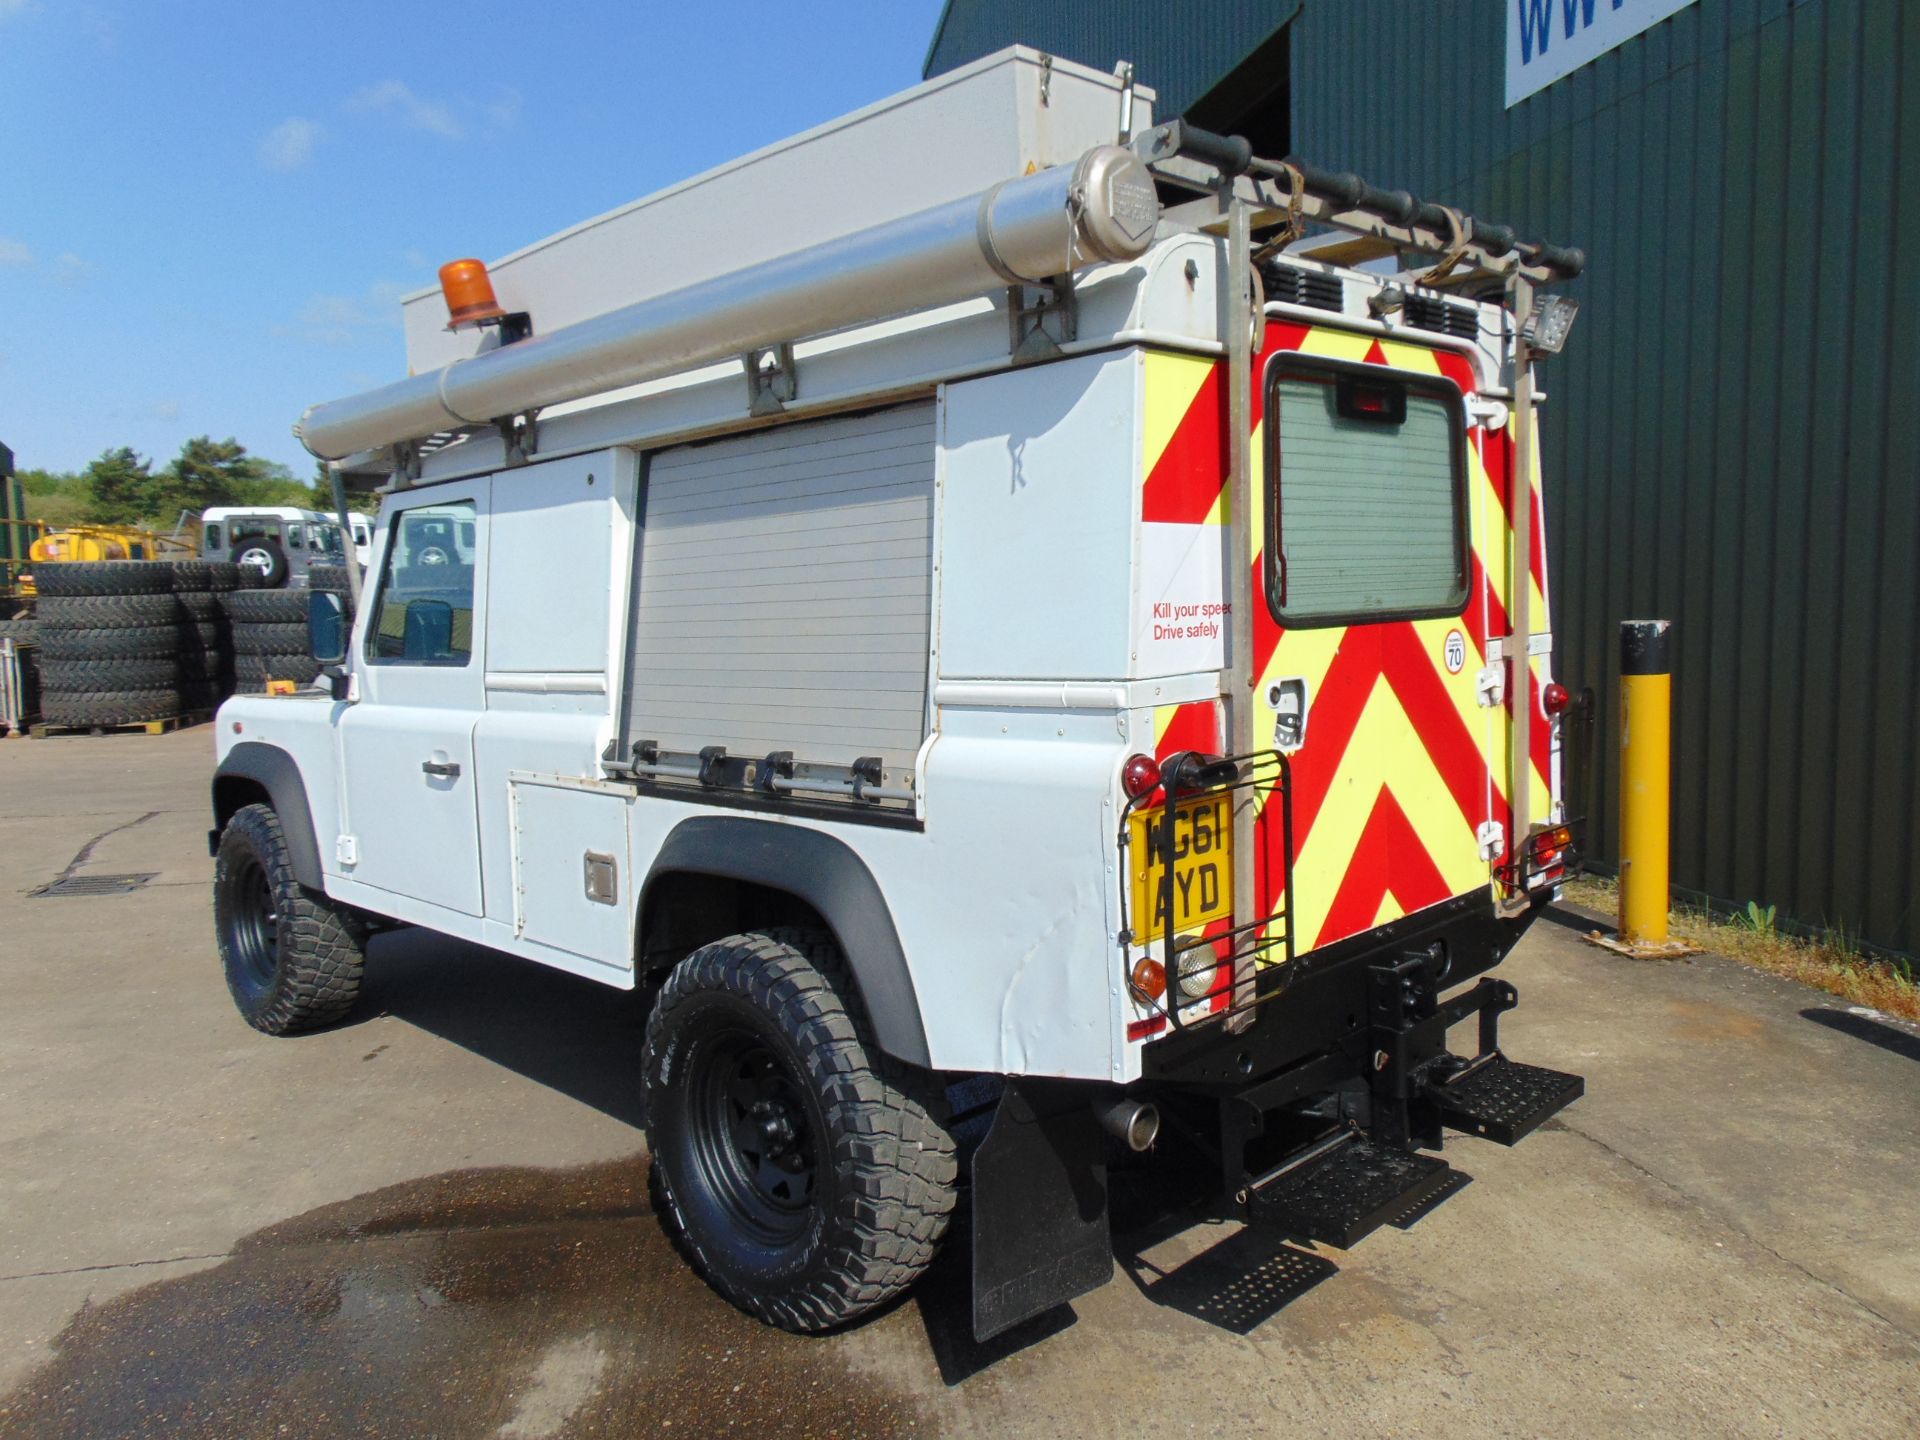 2011 Land Rover Defender 110 Puma hardtop 4x4 Utility vehicle (mobile workshop) with hydraulic winch - Image 8 of 53